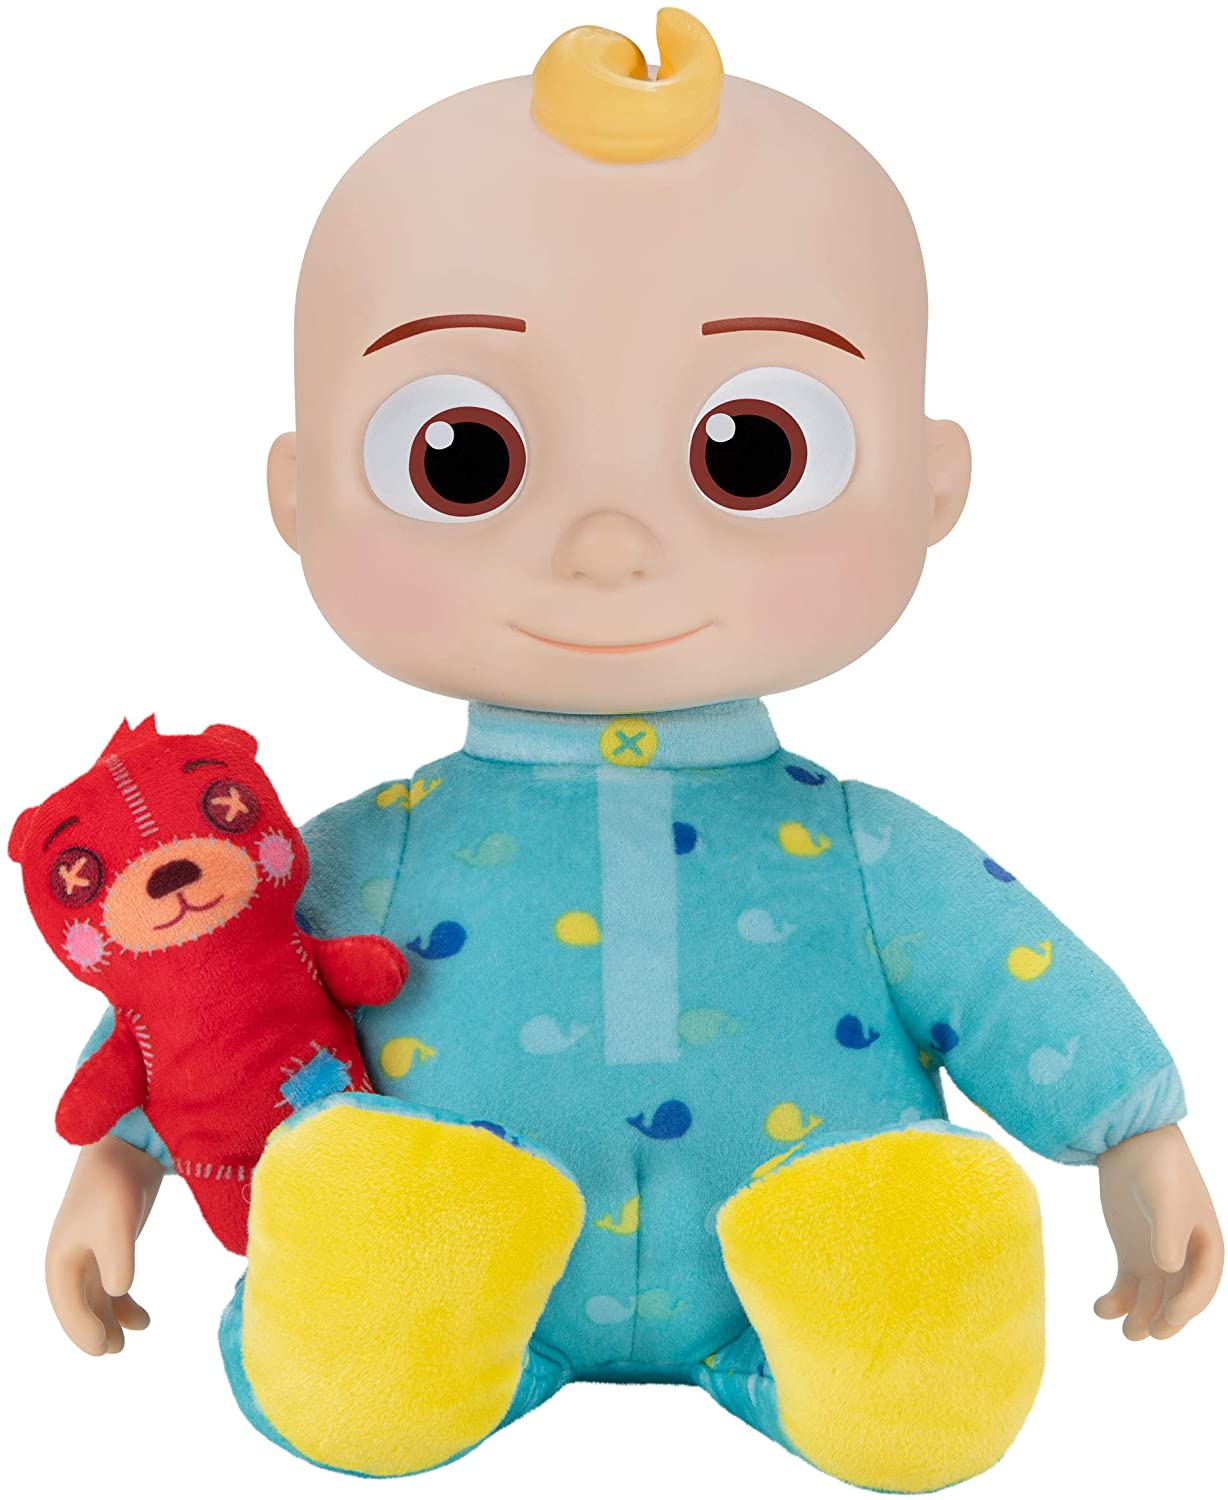 CoComelon Musical Bedtime JJ Plush Doll w/ Sounds & Phrases $12.15 + FS w/ Amazon Prime, FS on $25+ or Free Store Pickup at Target